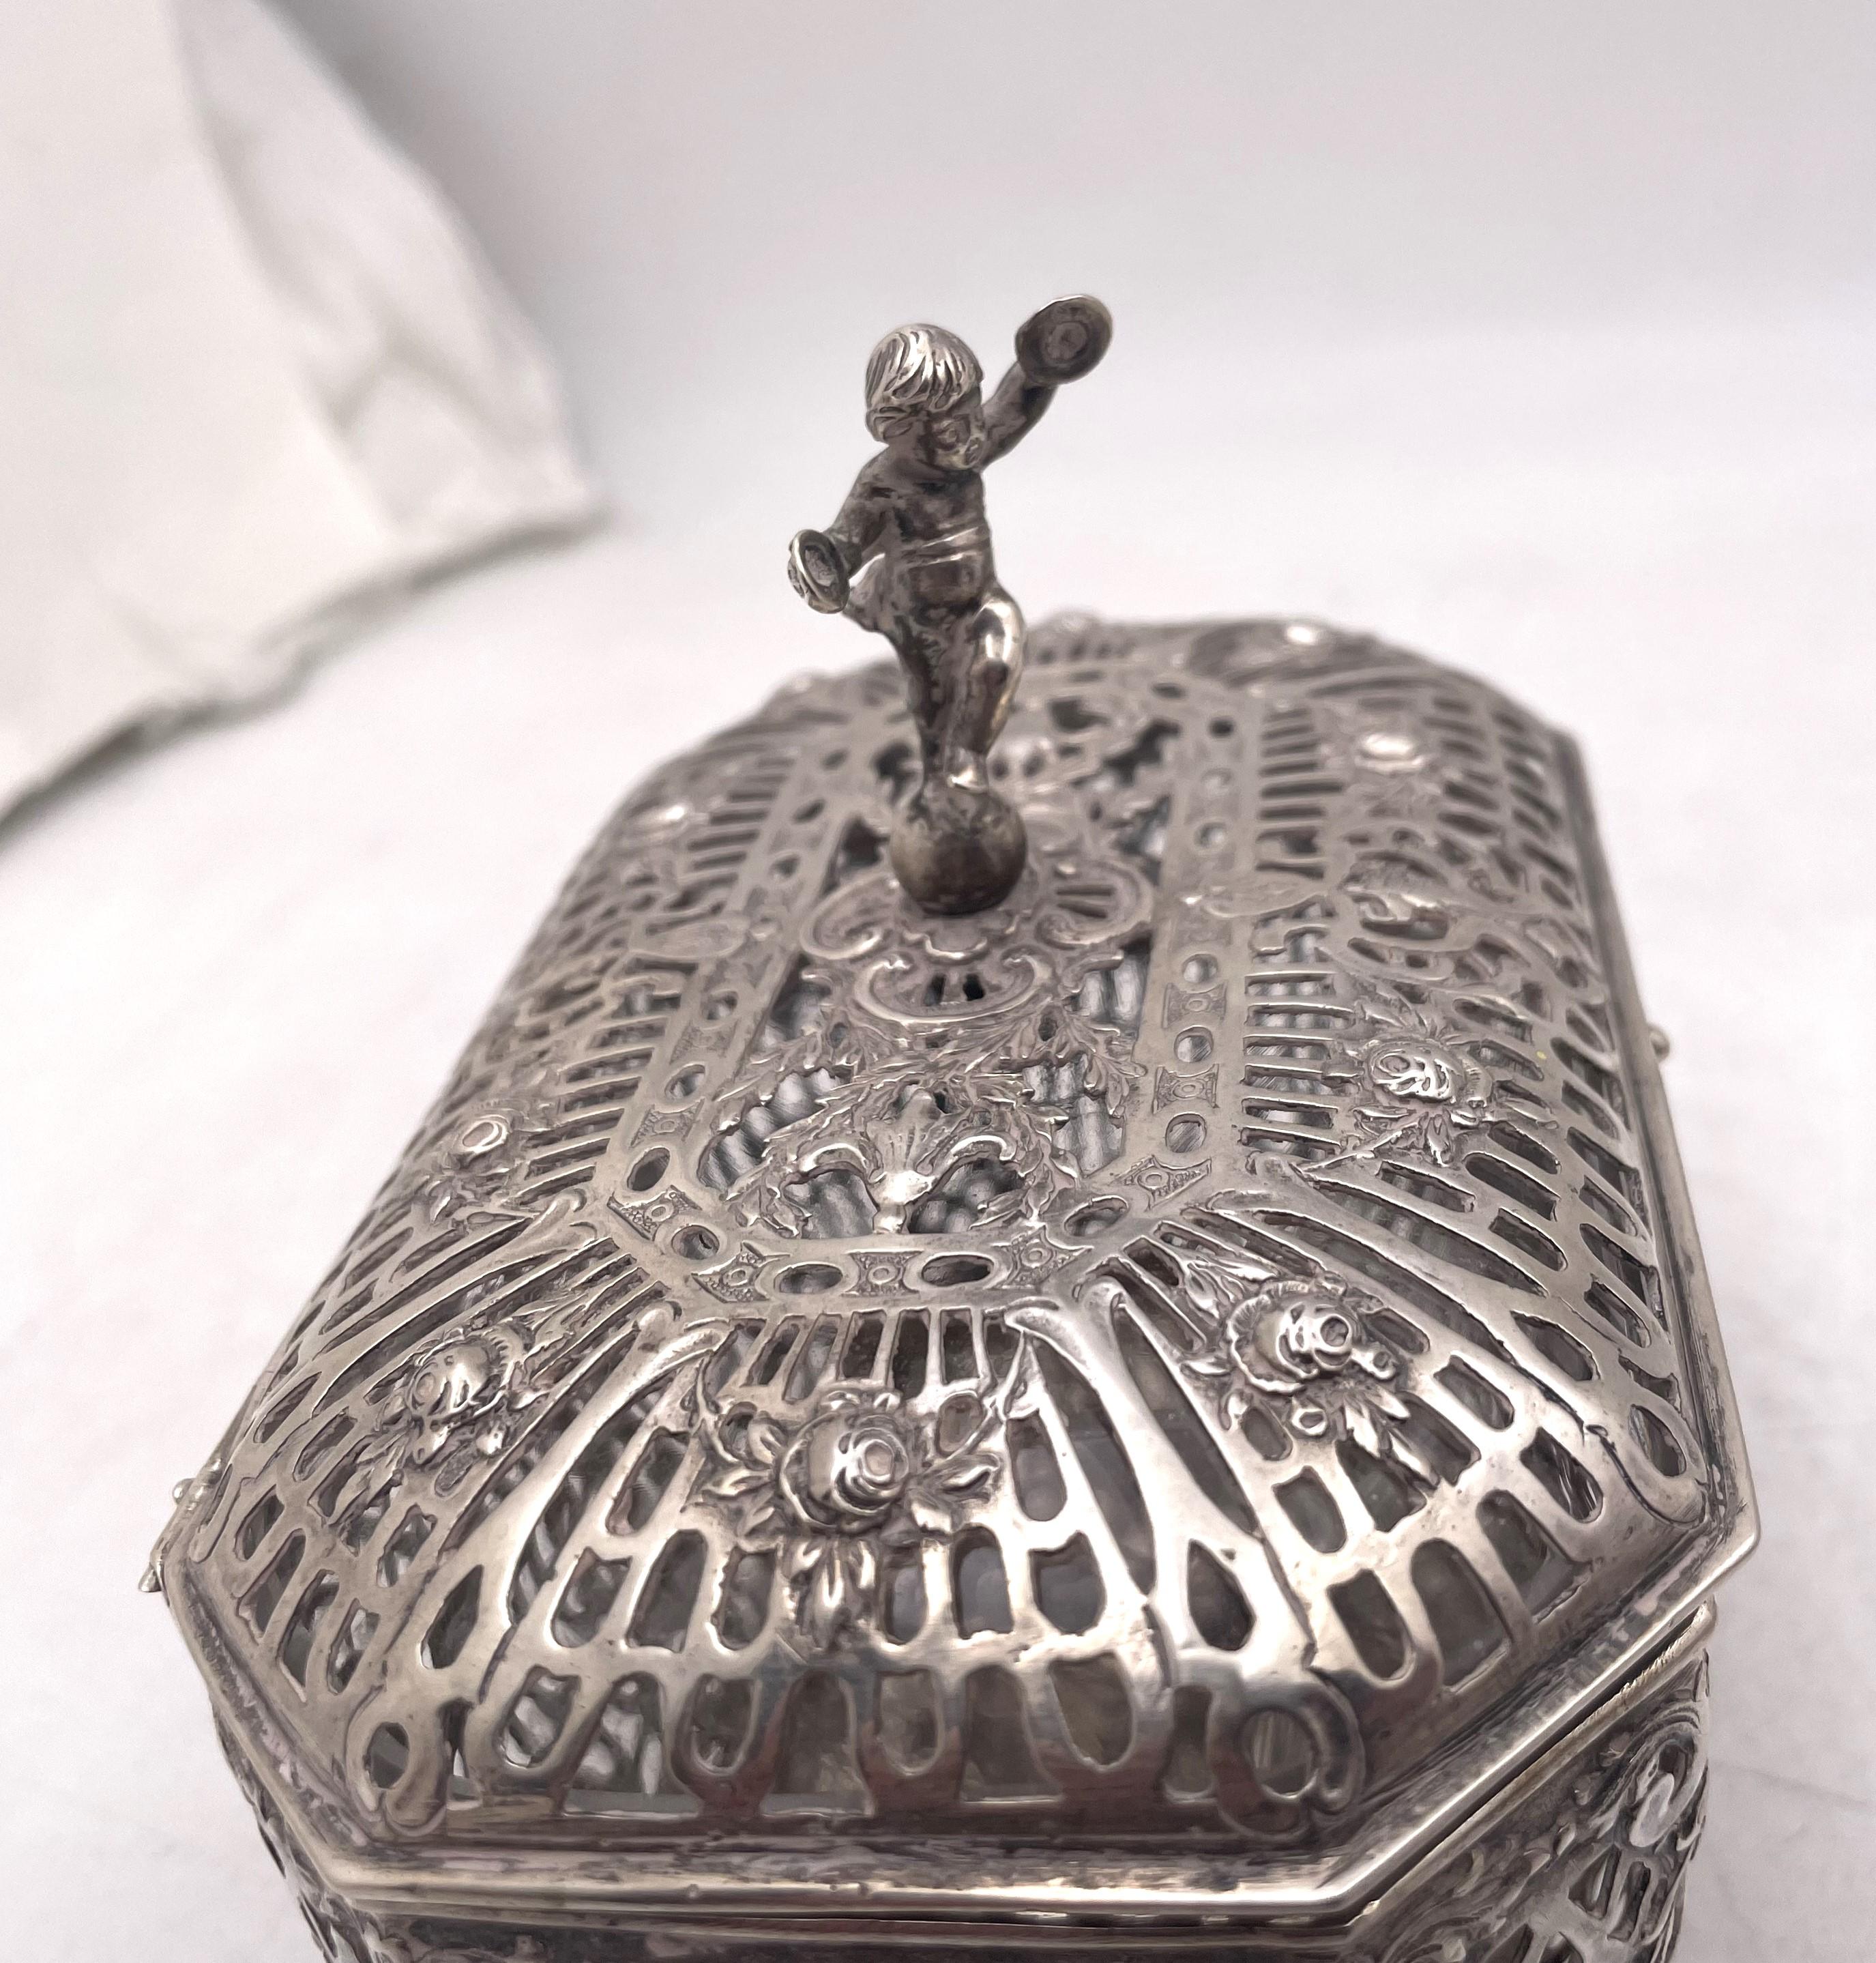 German, continental 0.800 silver casket, beautifully adorned with a putti on top, with pierced geometric and floral motifs. There is glass inside the top part of the casket. It measures 5 1/3'' in length by 3 1/2'' in width by 4 3/4'' in height and